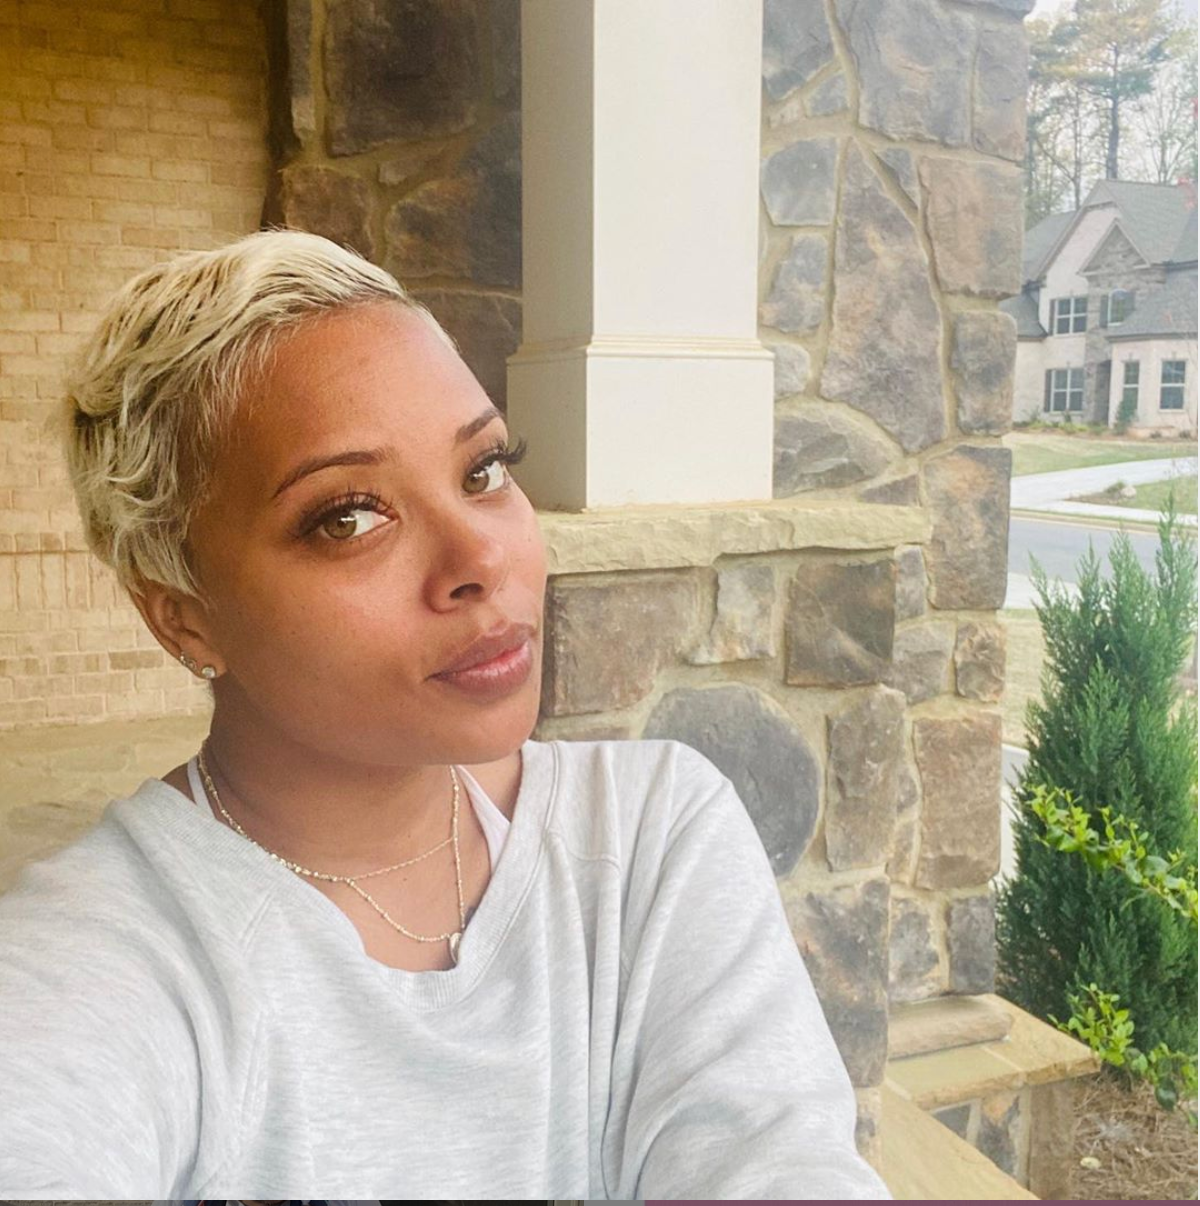 ‘Real Housewives of Atlanta’ Stars Go Makeup-Free For New Social Media Challenge